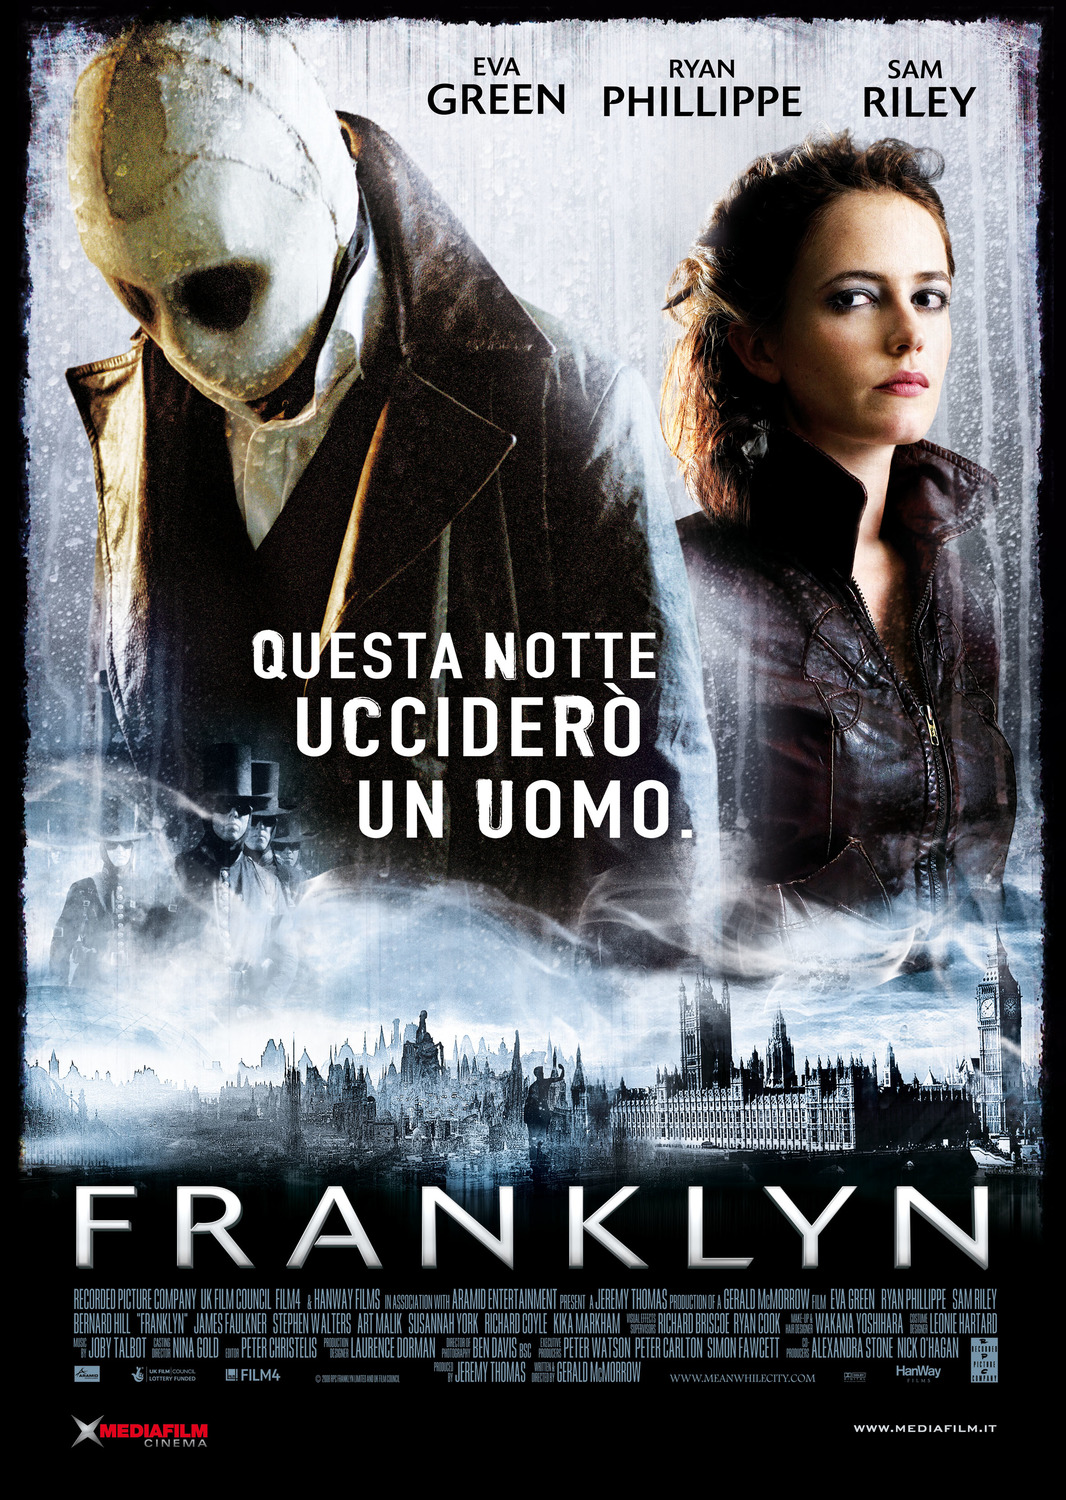 Extra Large Movie Poster Image for Franklyn (#6 of 6)